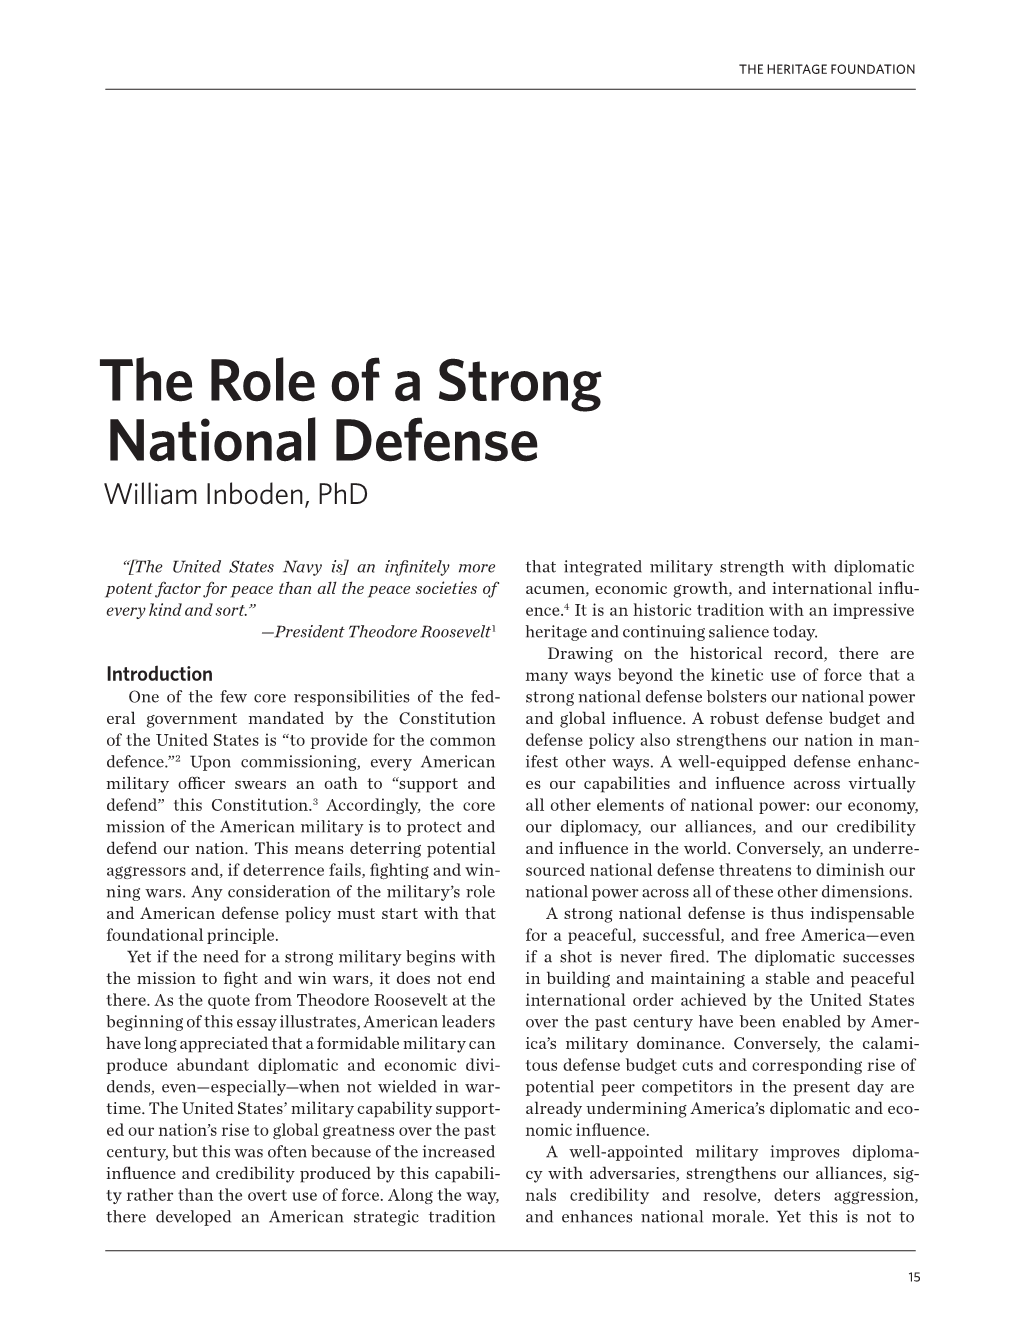 The Role of a Strong National Defense William Inboden, Phd